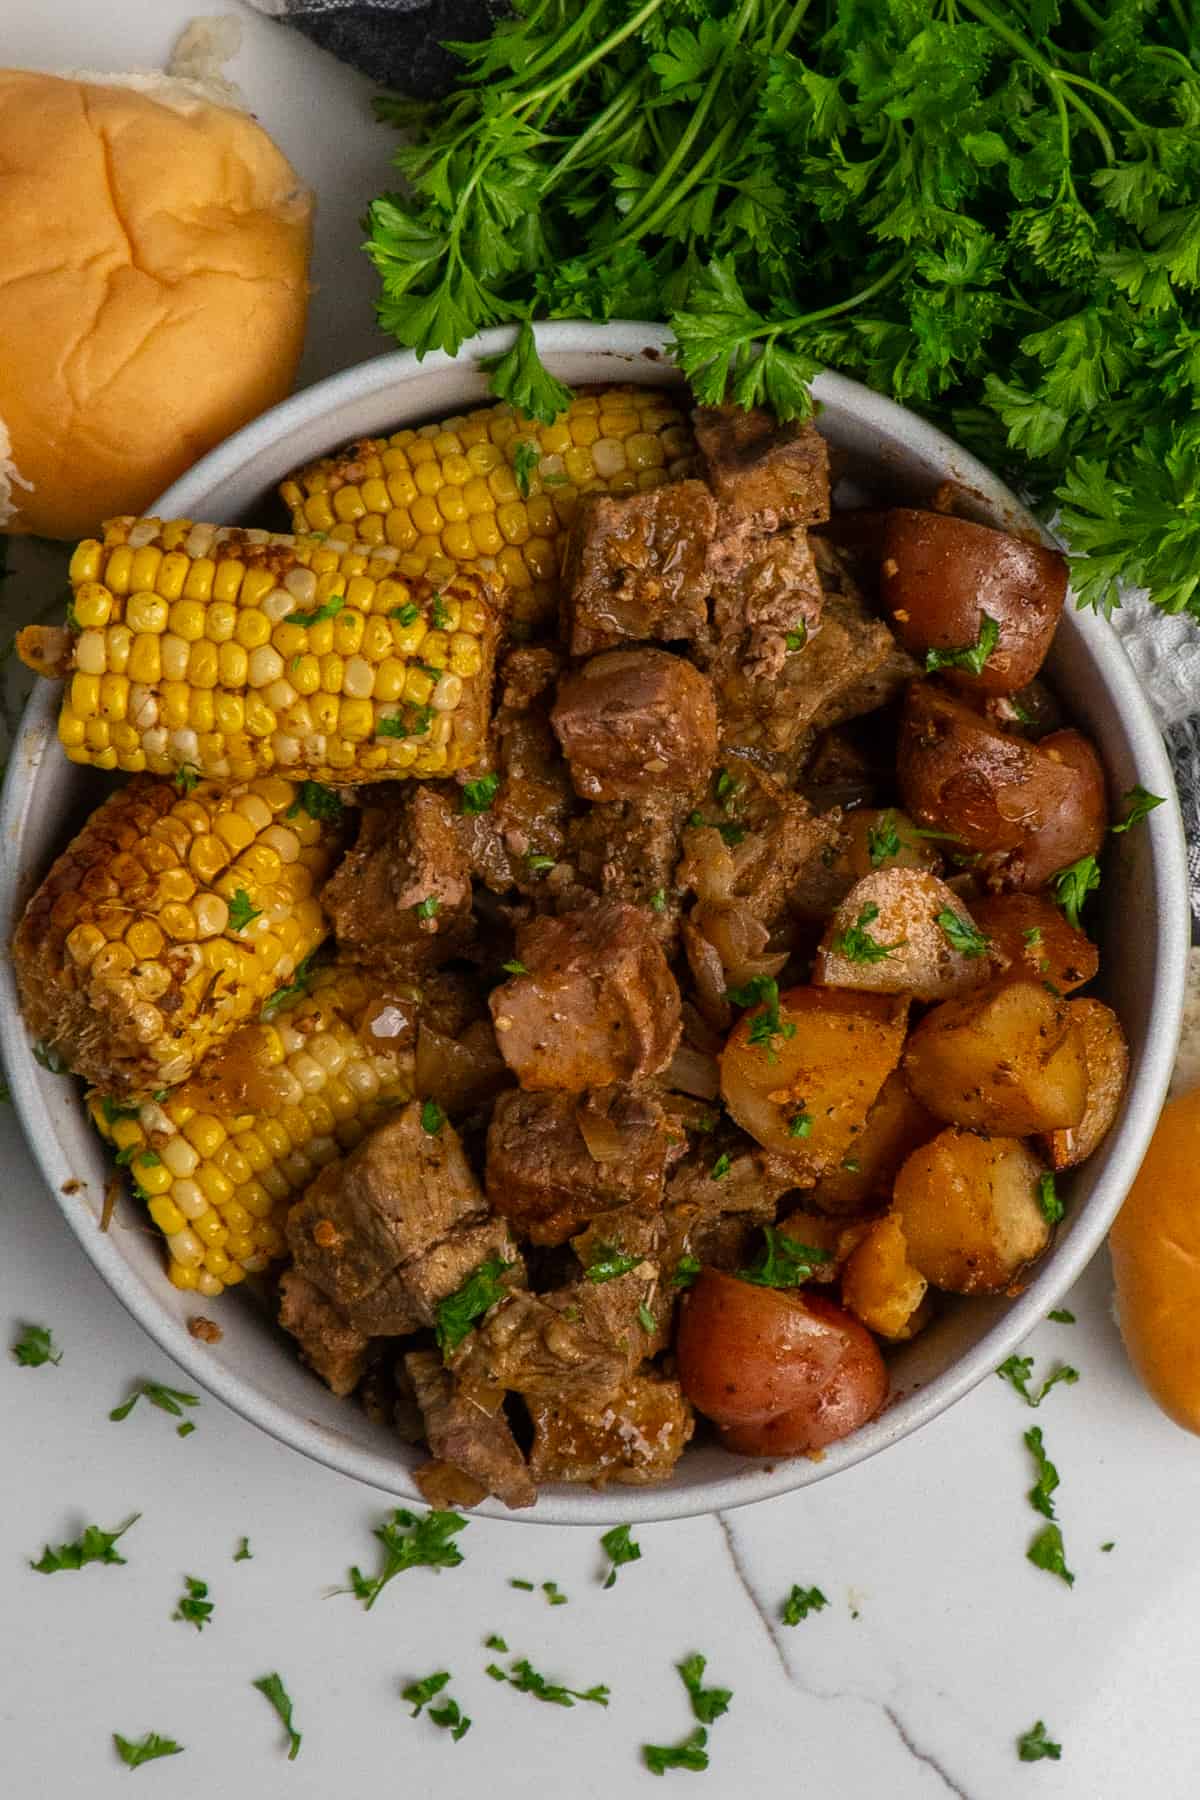 Overhead look at a bowl full of steak bites, corn on the cob and red potatoes.